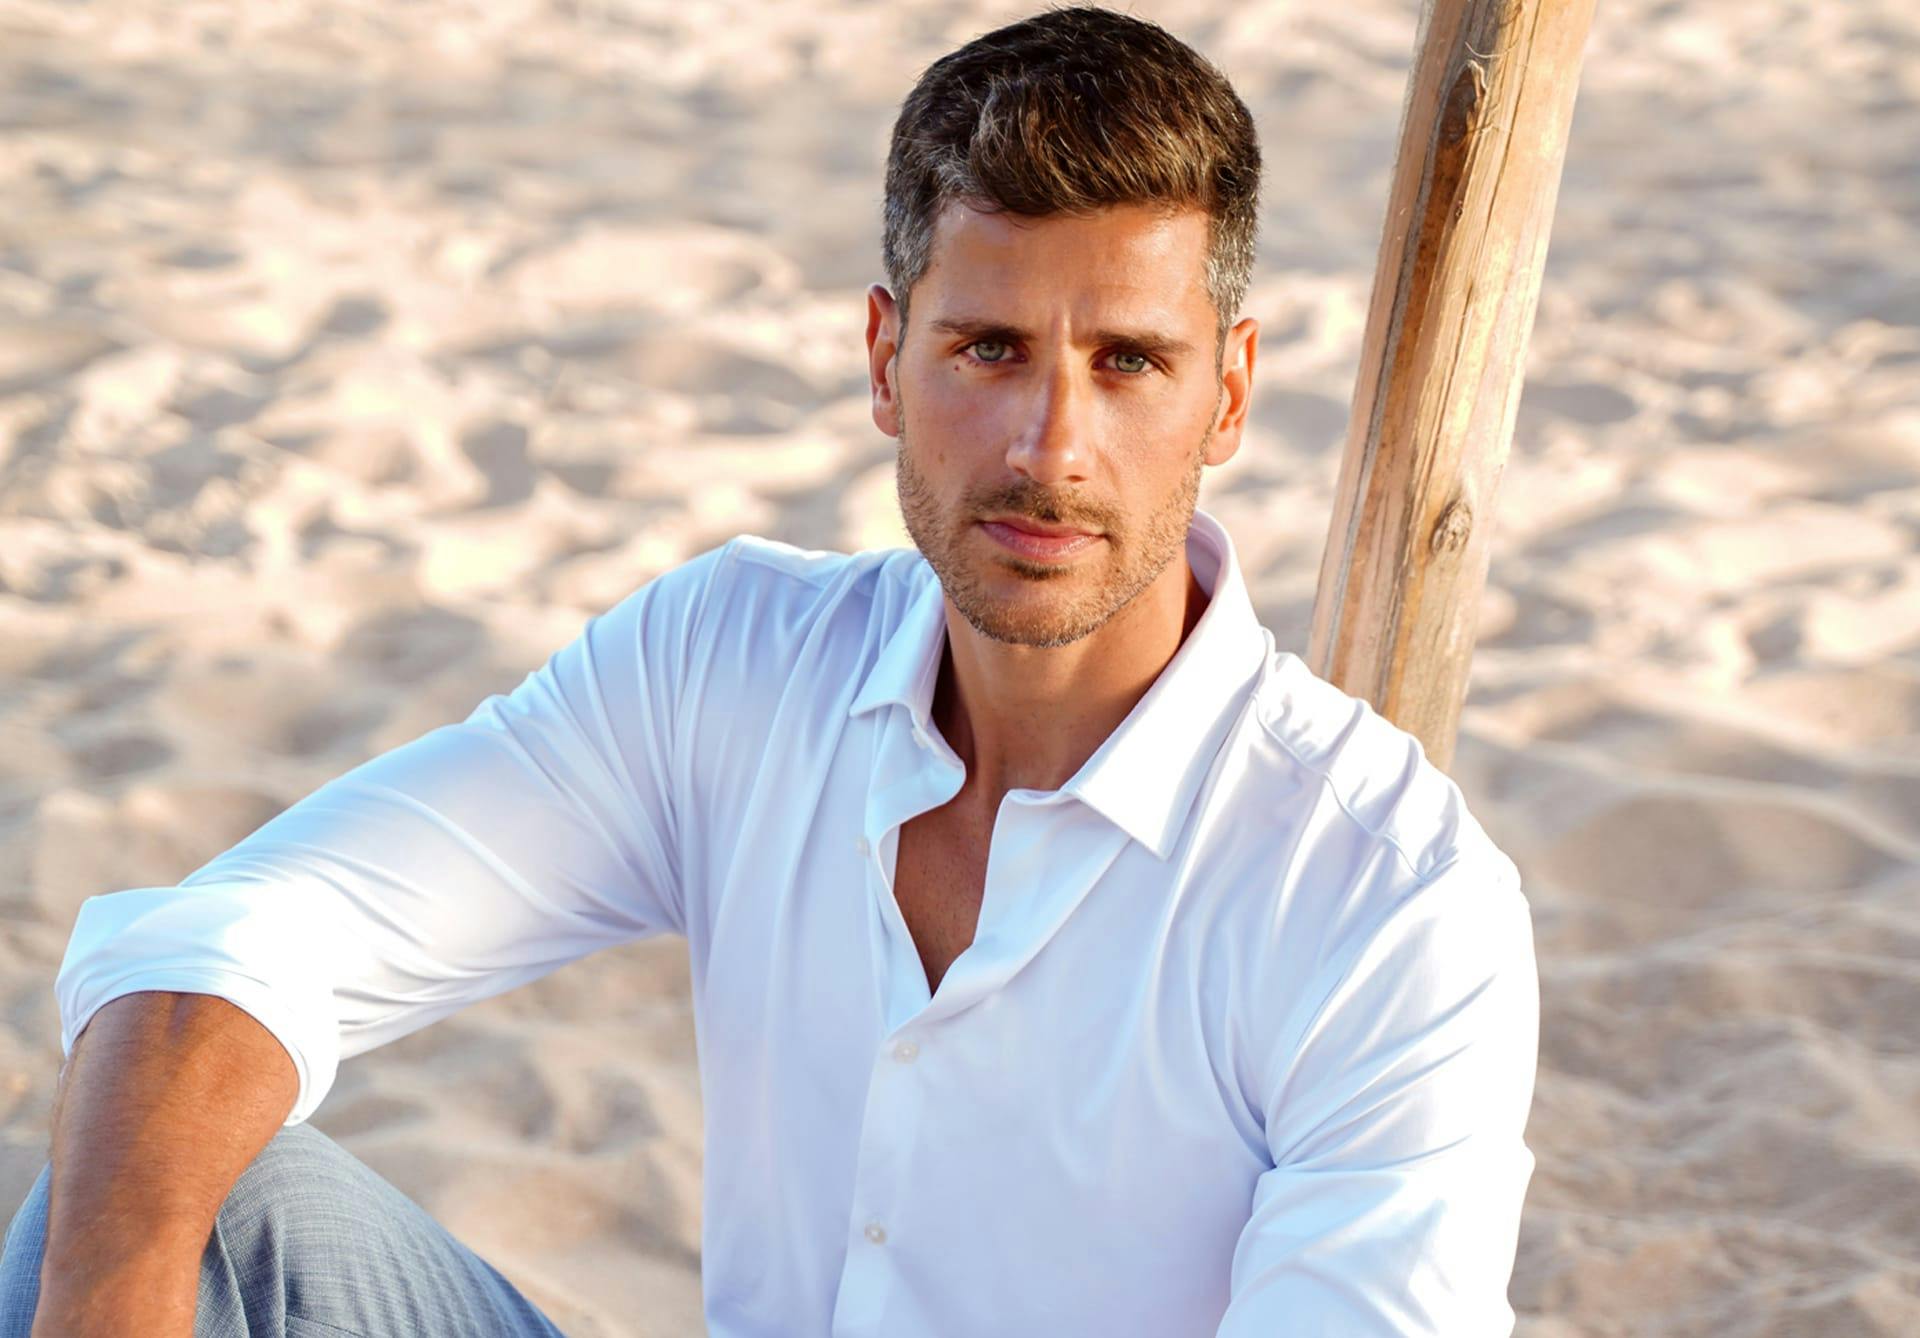 Handsome man in a white button up shirt sitting at the beach